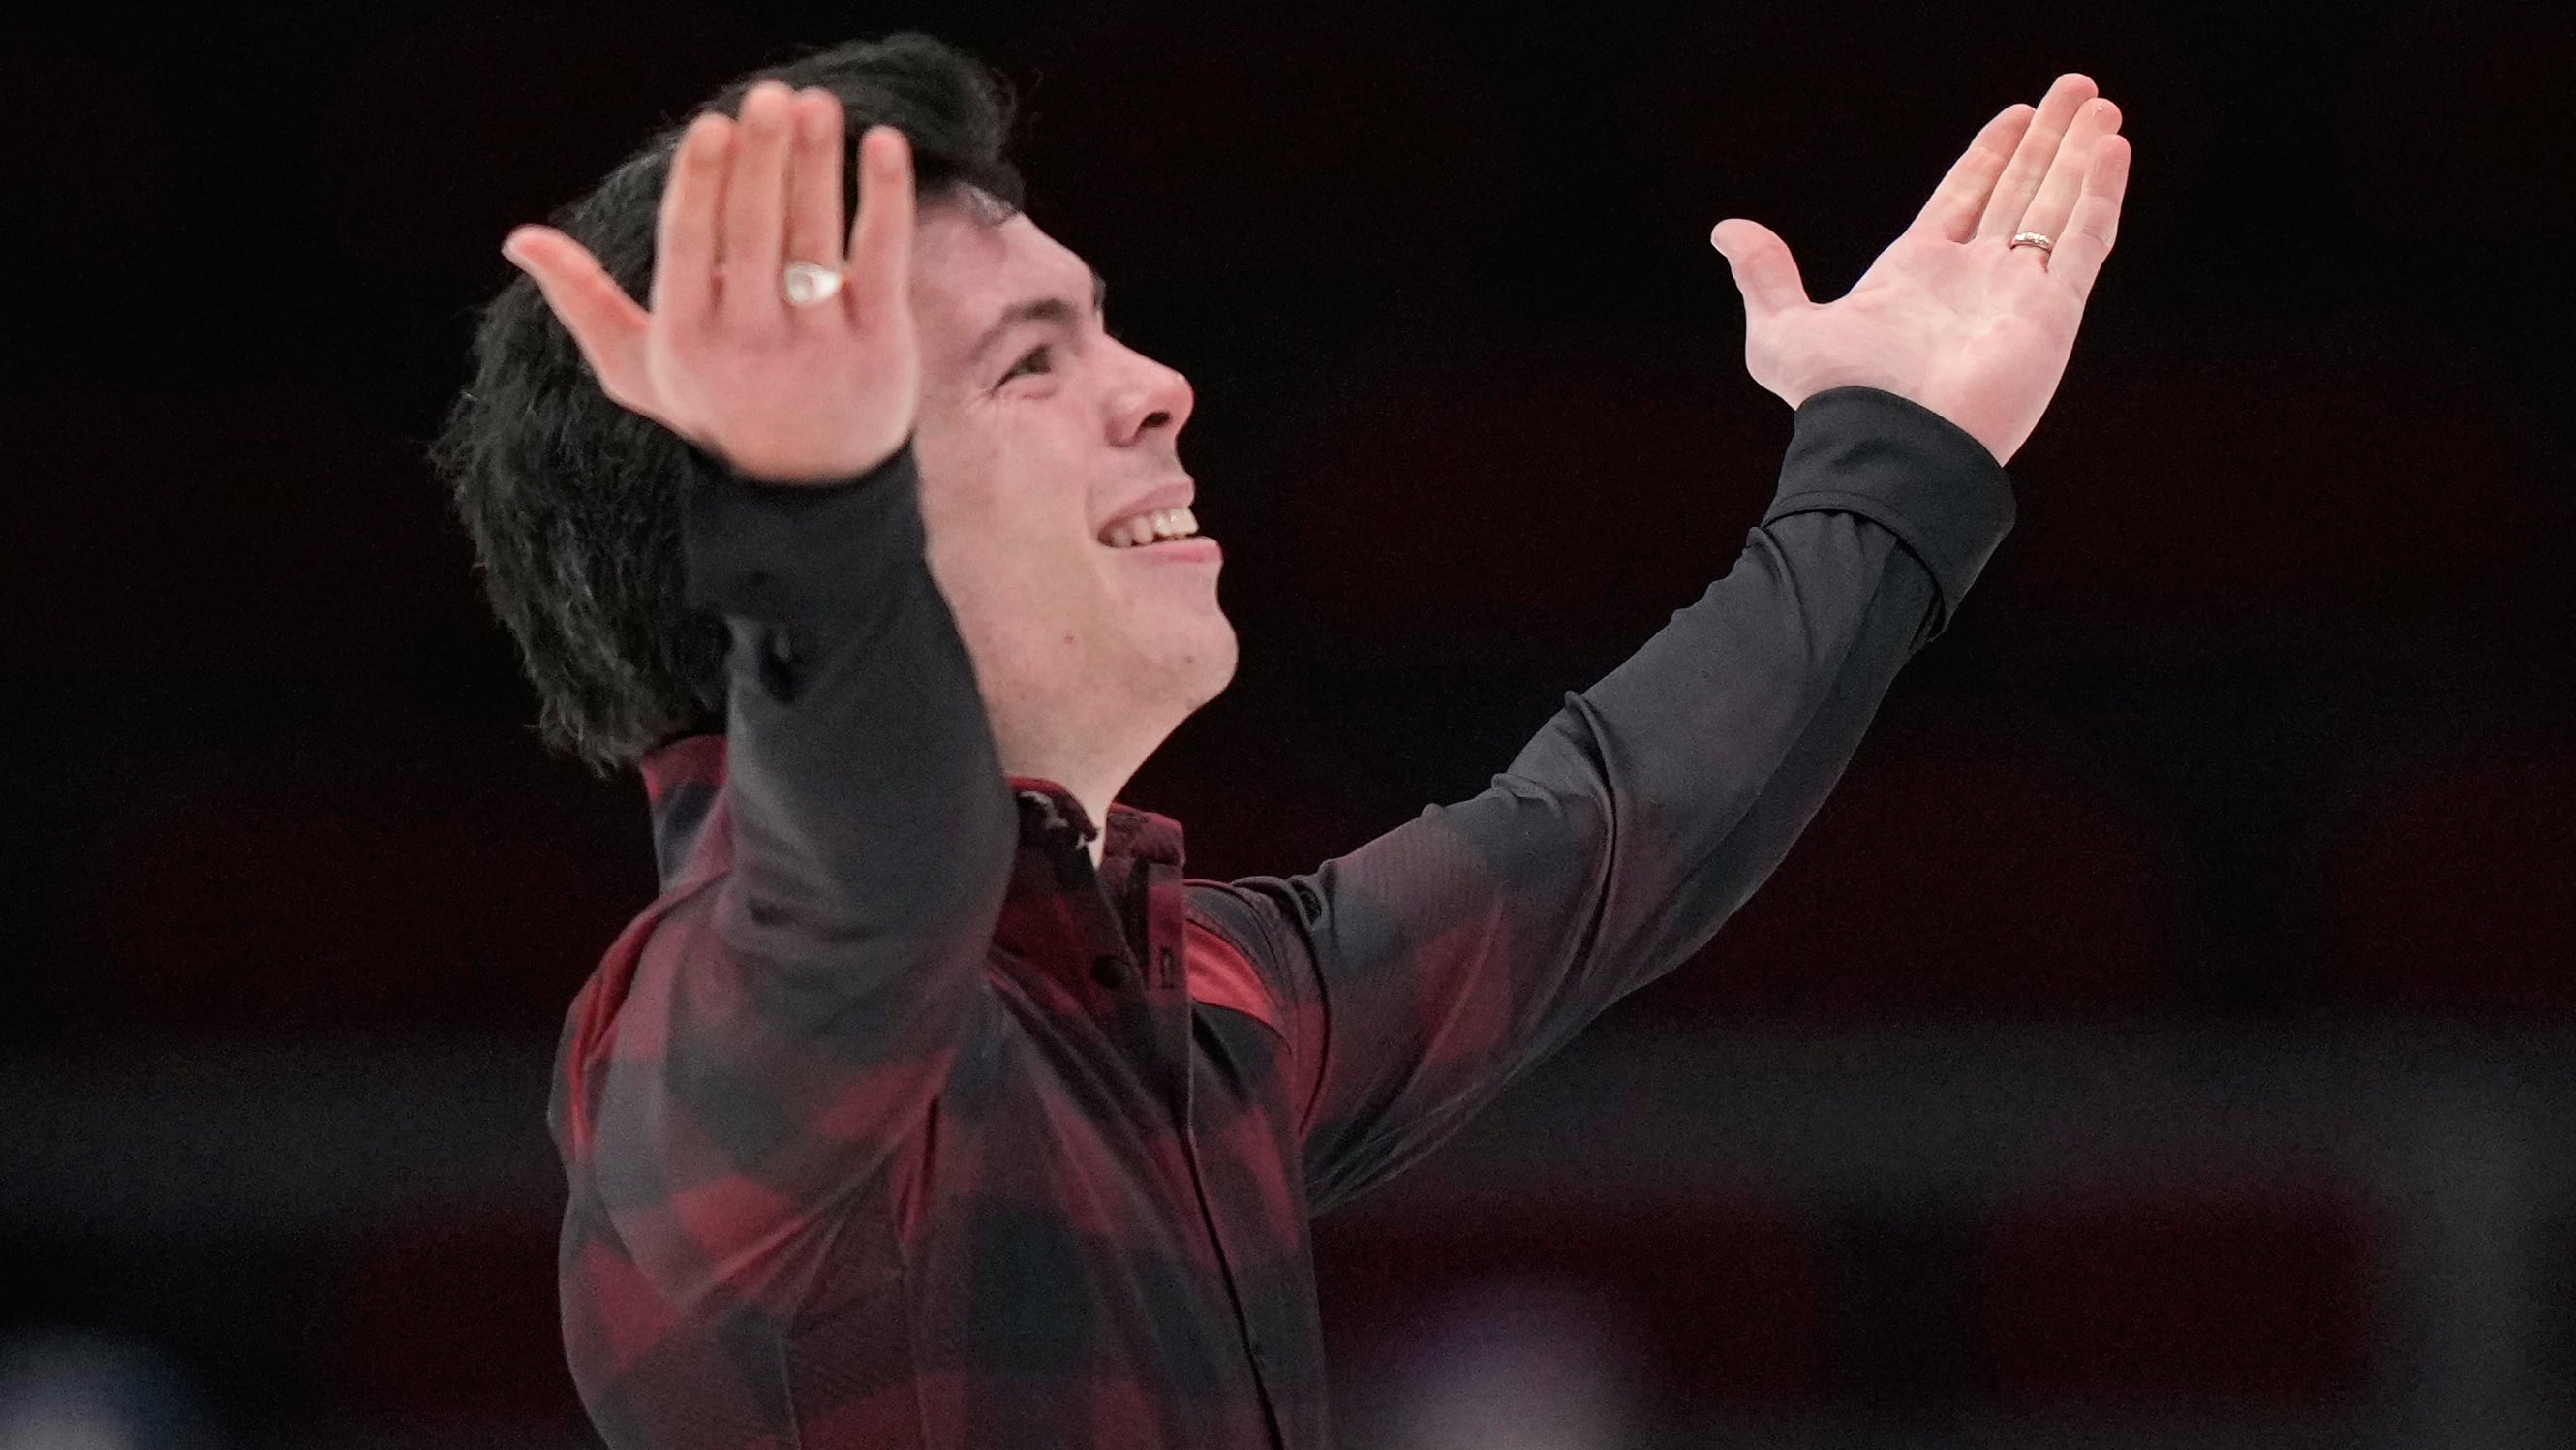 Figure skater Keegan Messing tests negative twice, needs 1 more to be cleared for travel to Beijing